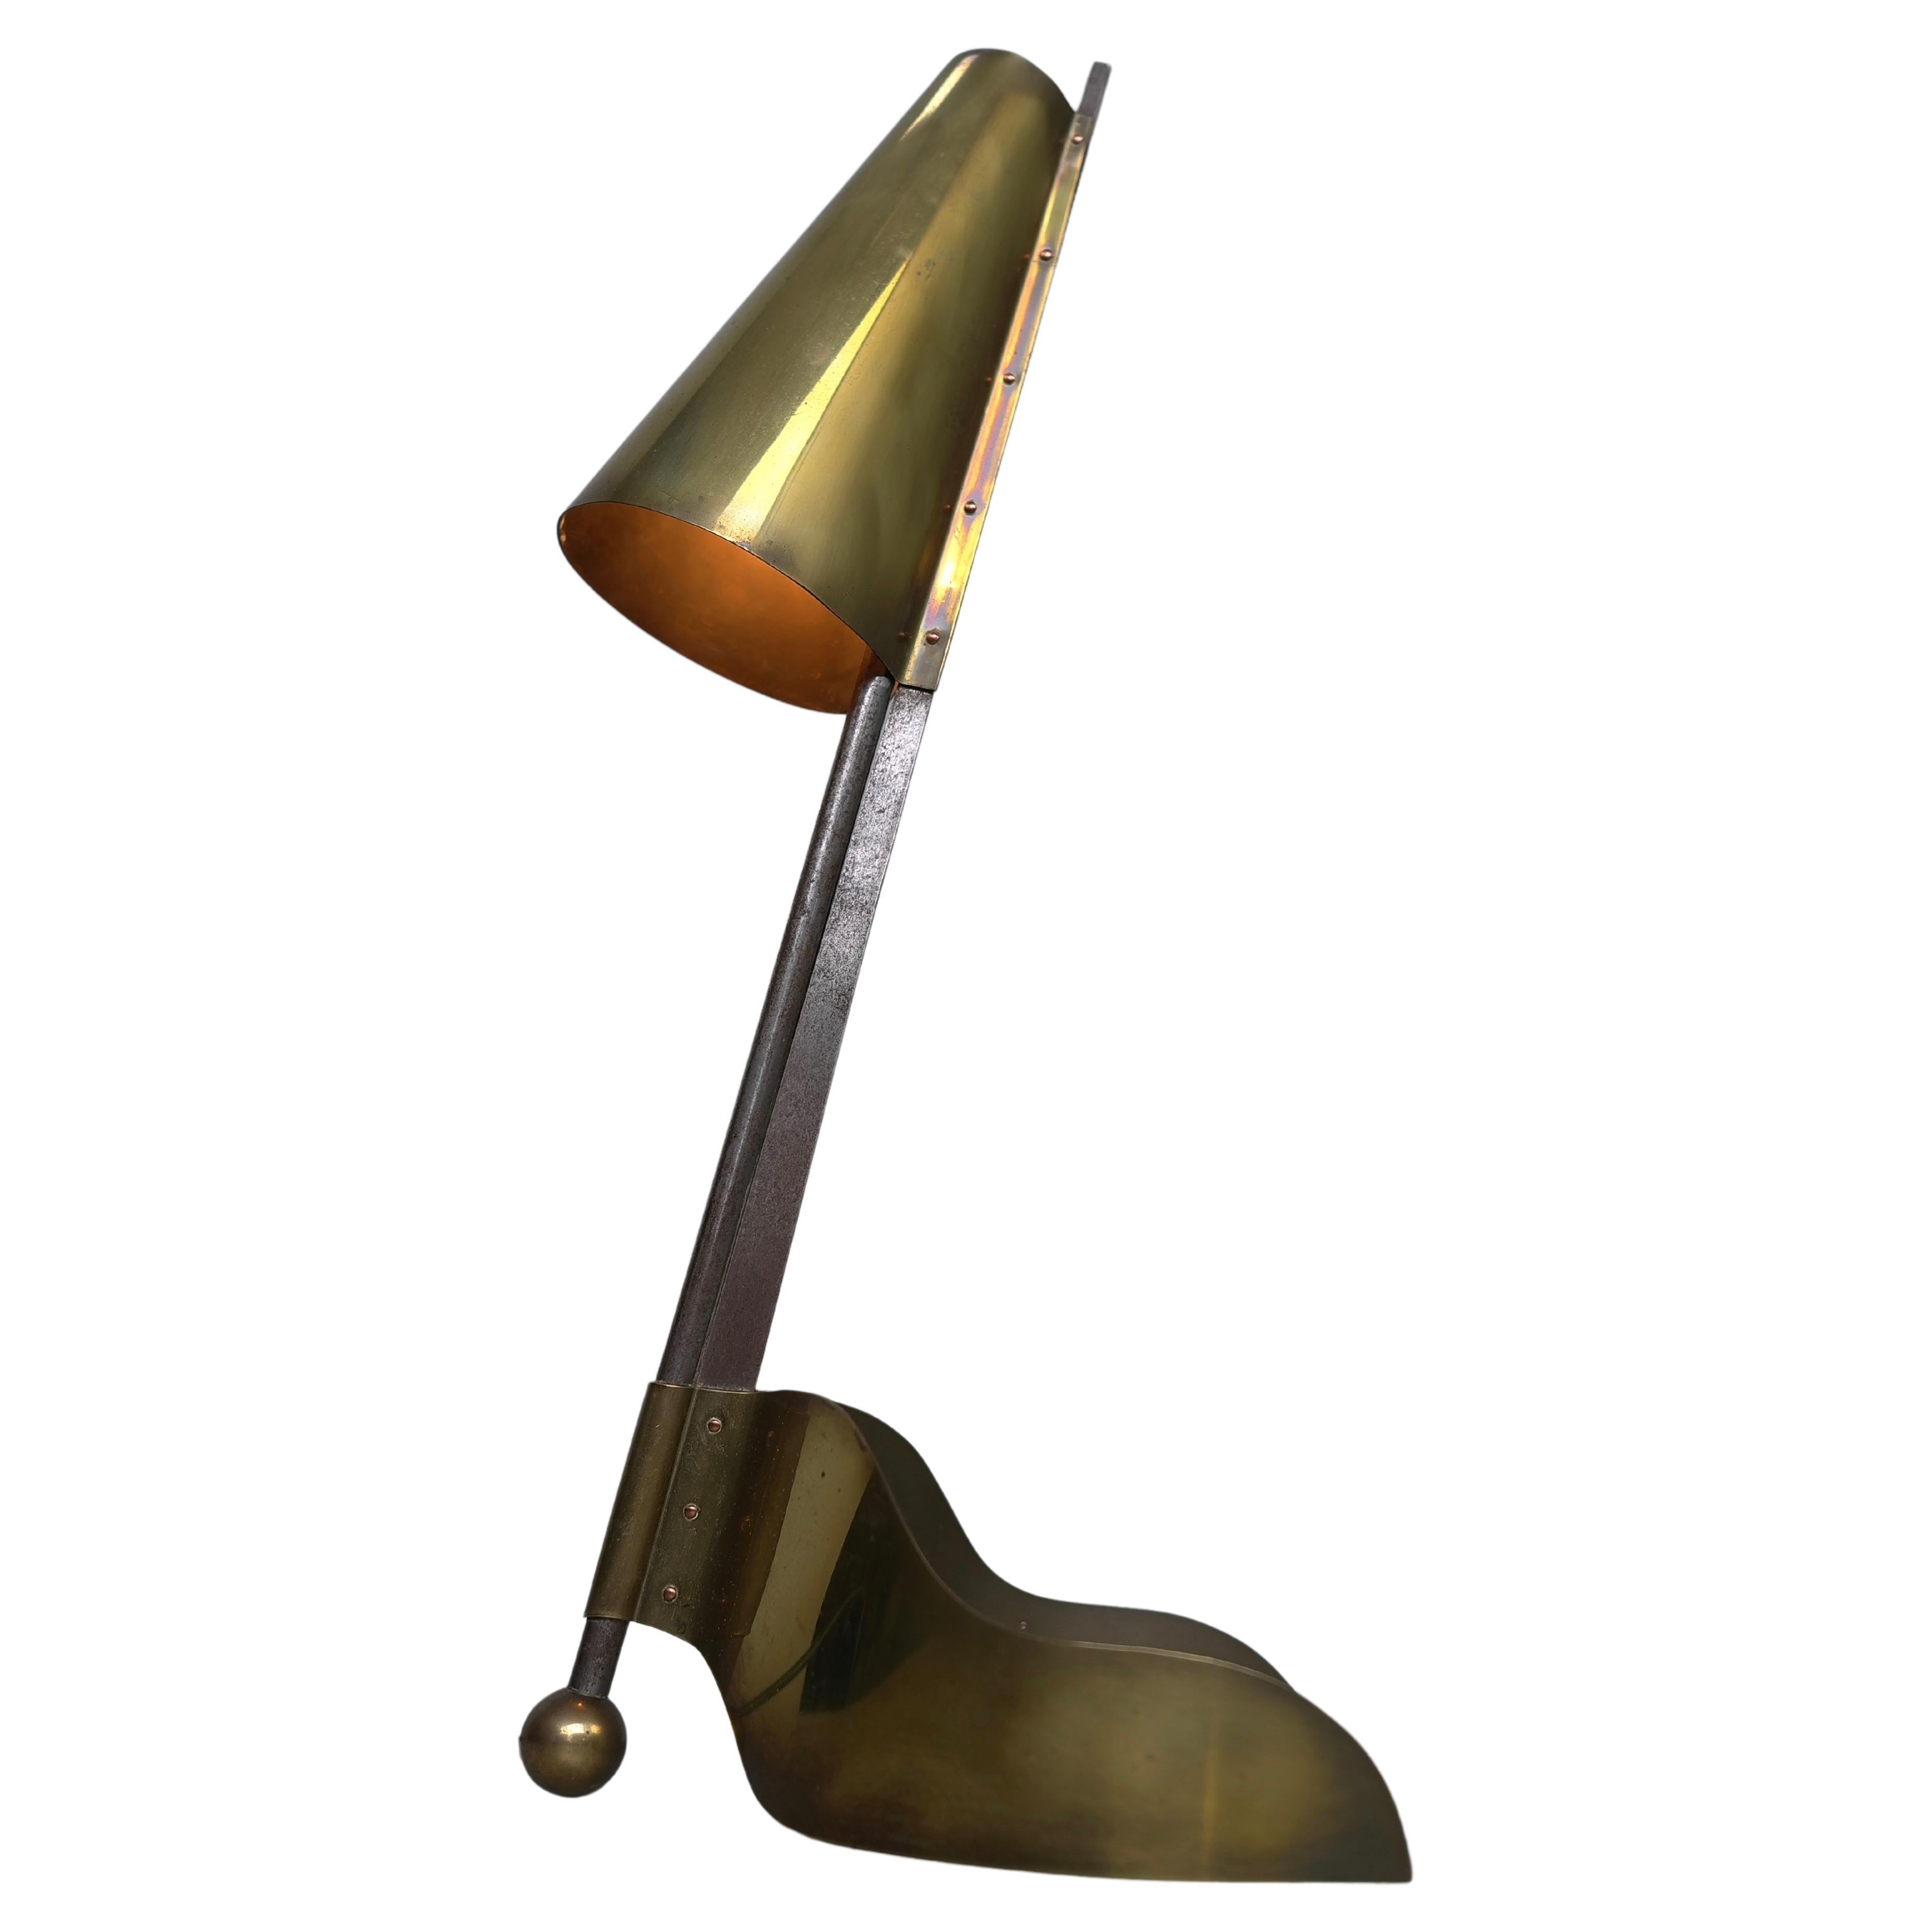 Architect Table Lamp, Sculptural shaped Copper and Steel, 1930's For Sale